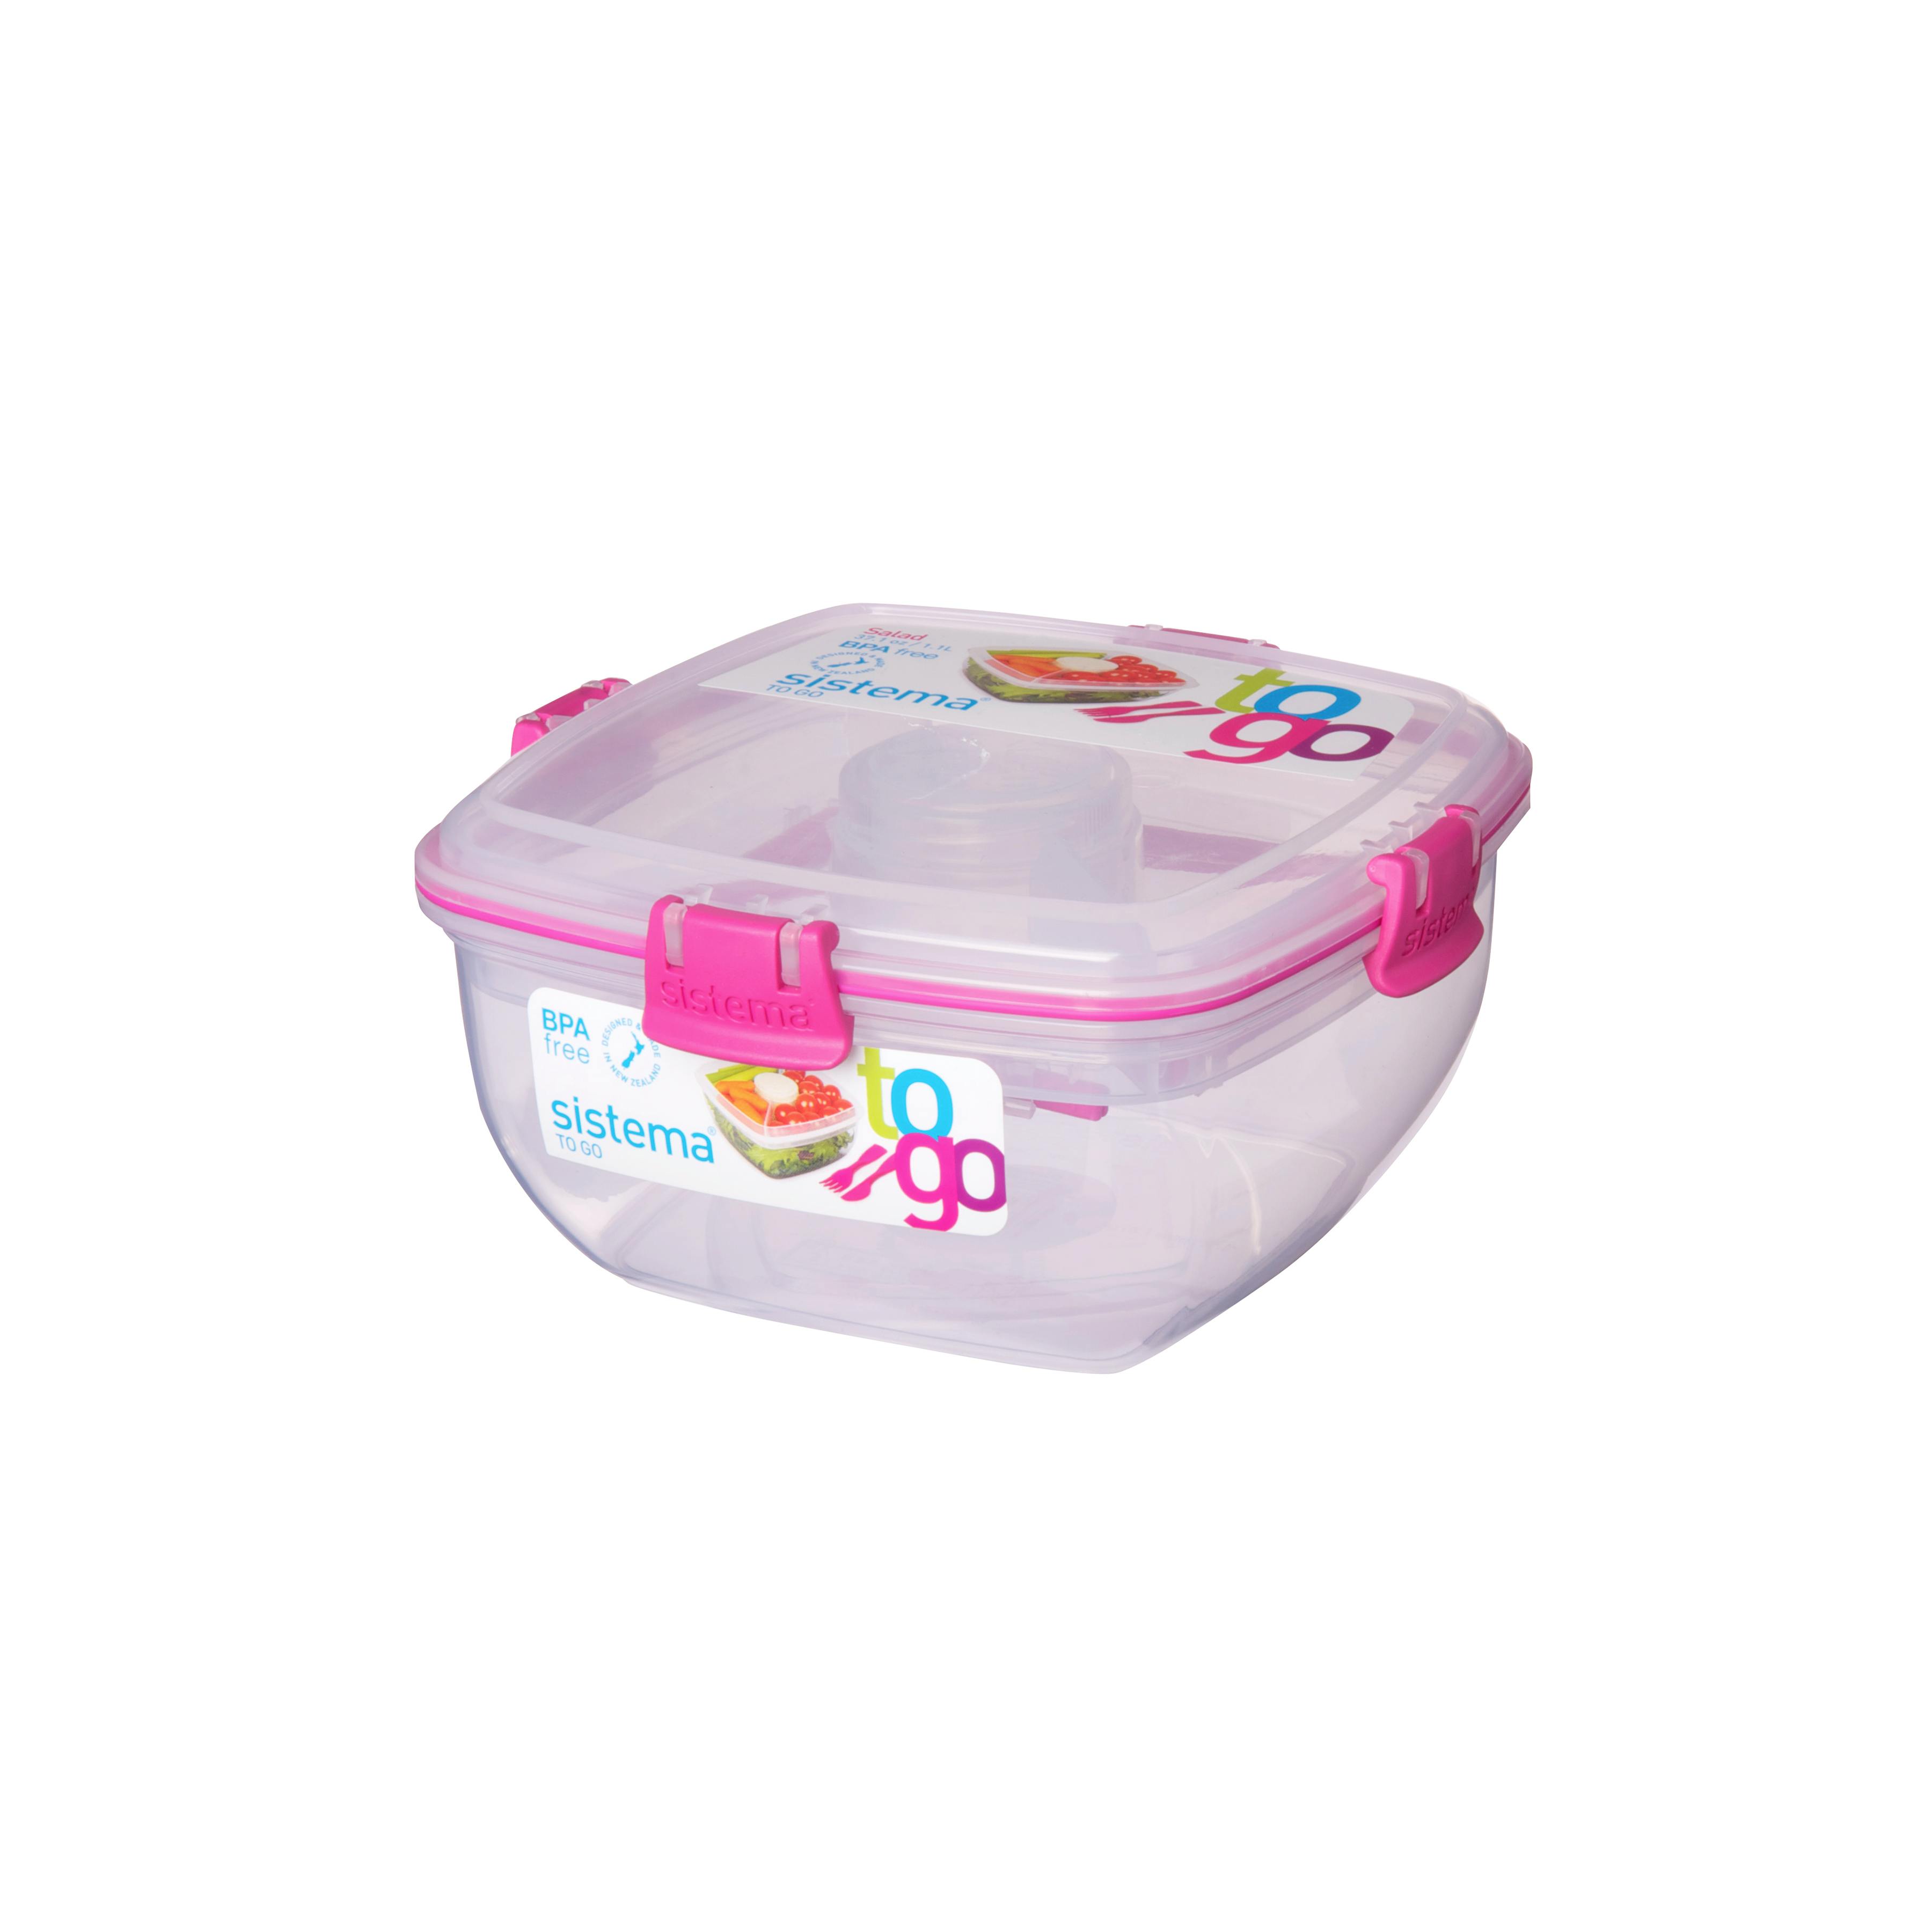 Sistema to Go Collection Dressing Food Storage Containers 1.1